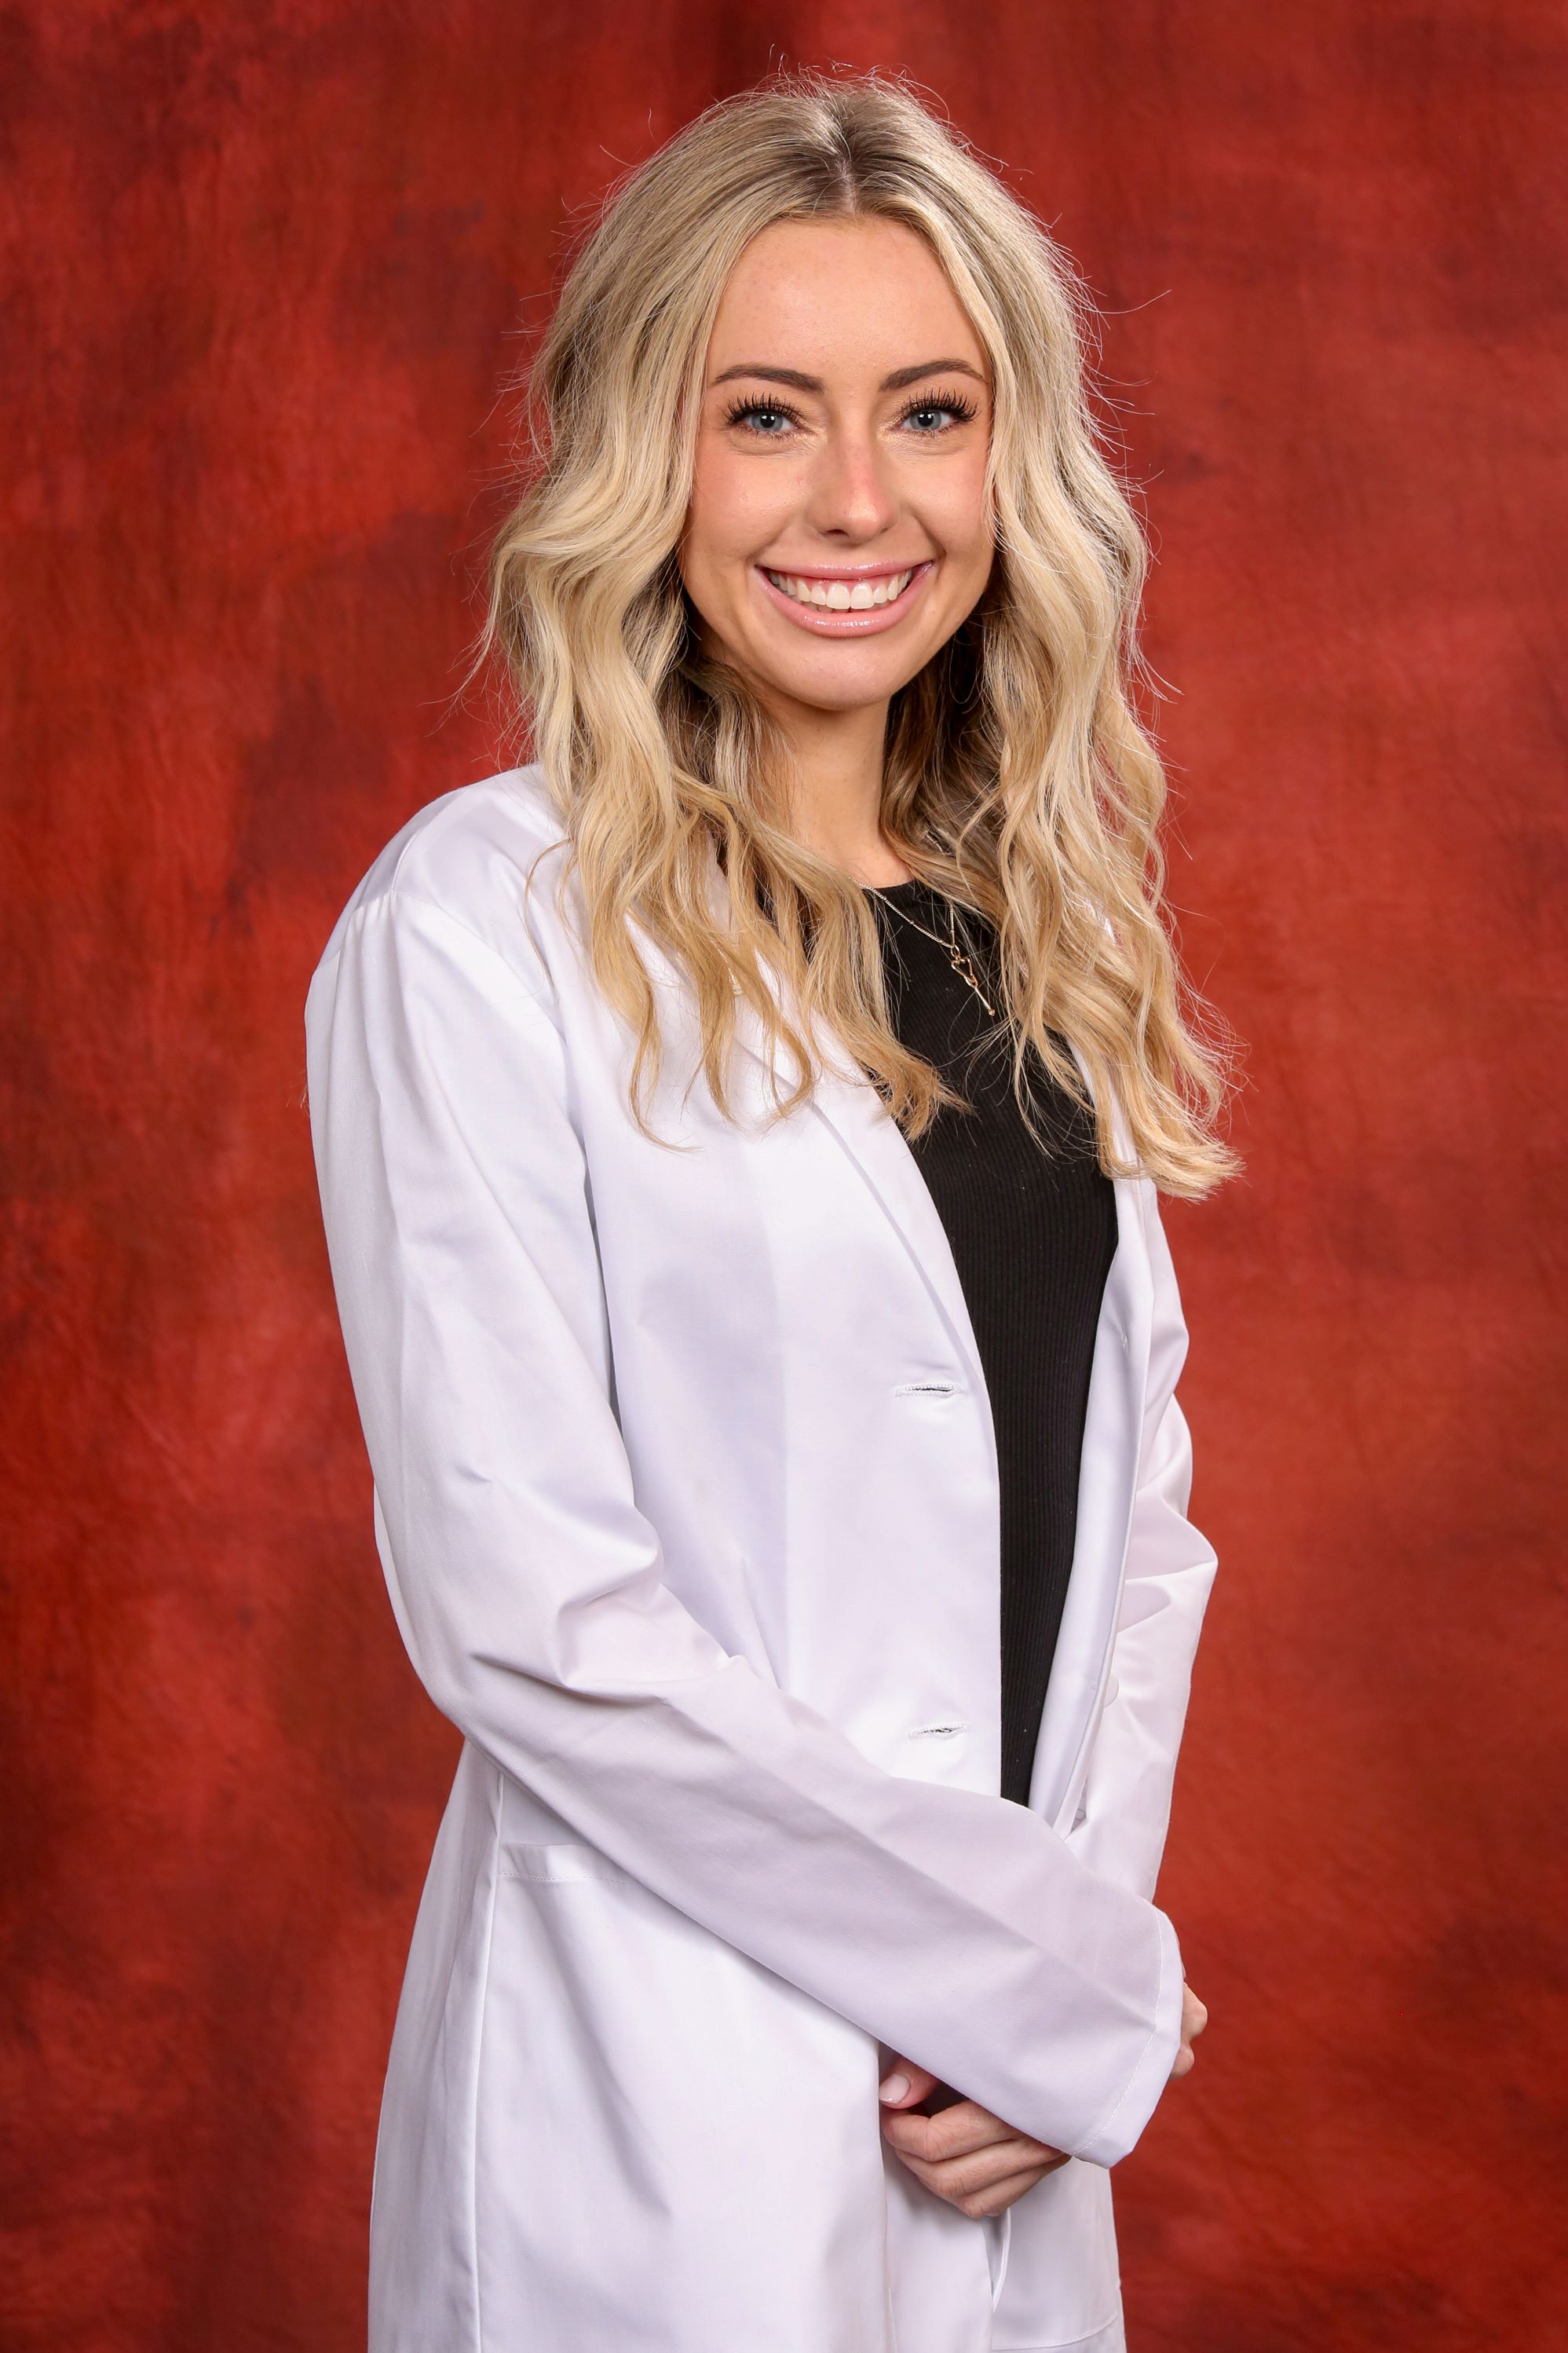 Madison Doucette white coat picture